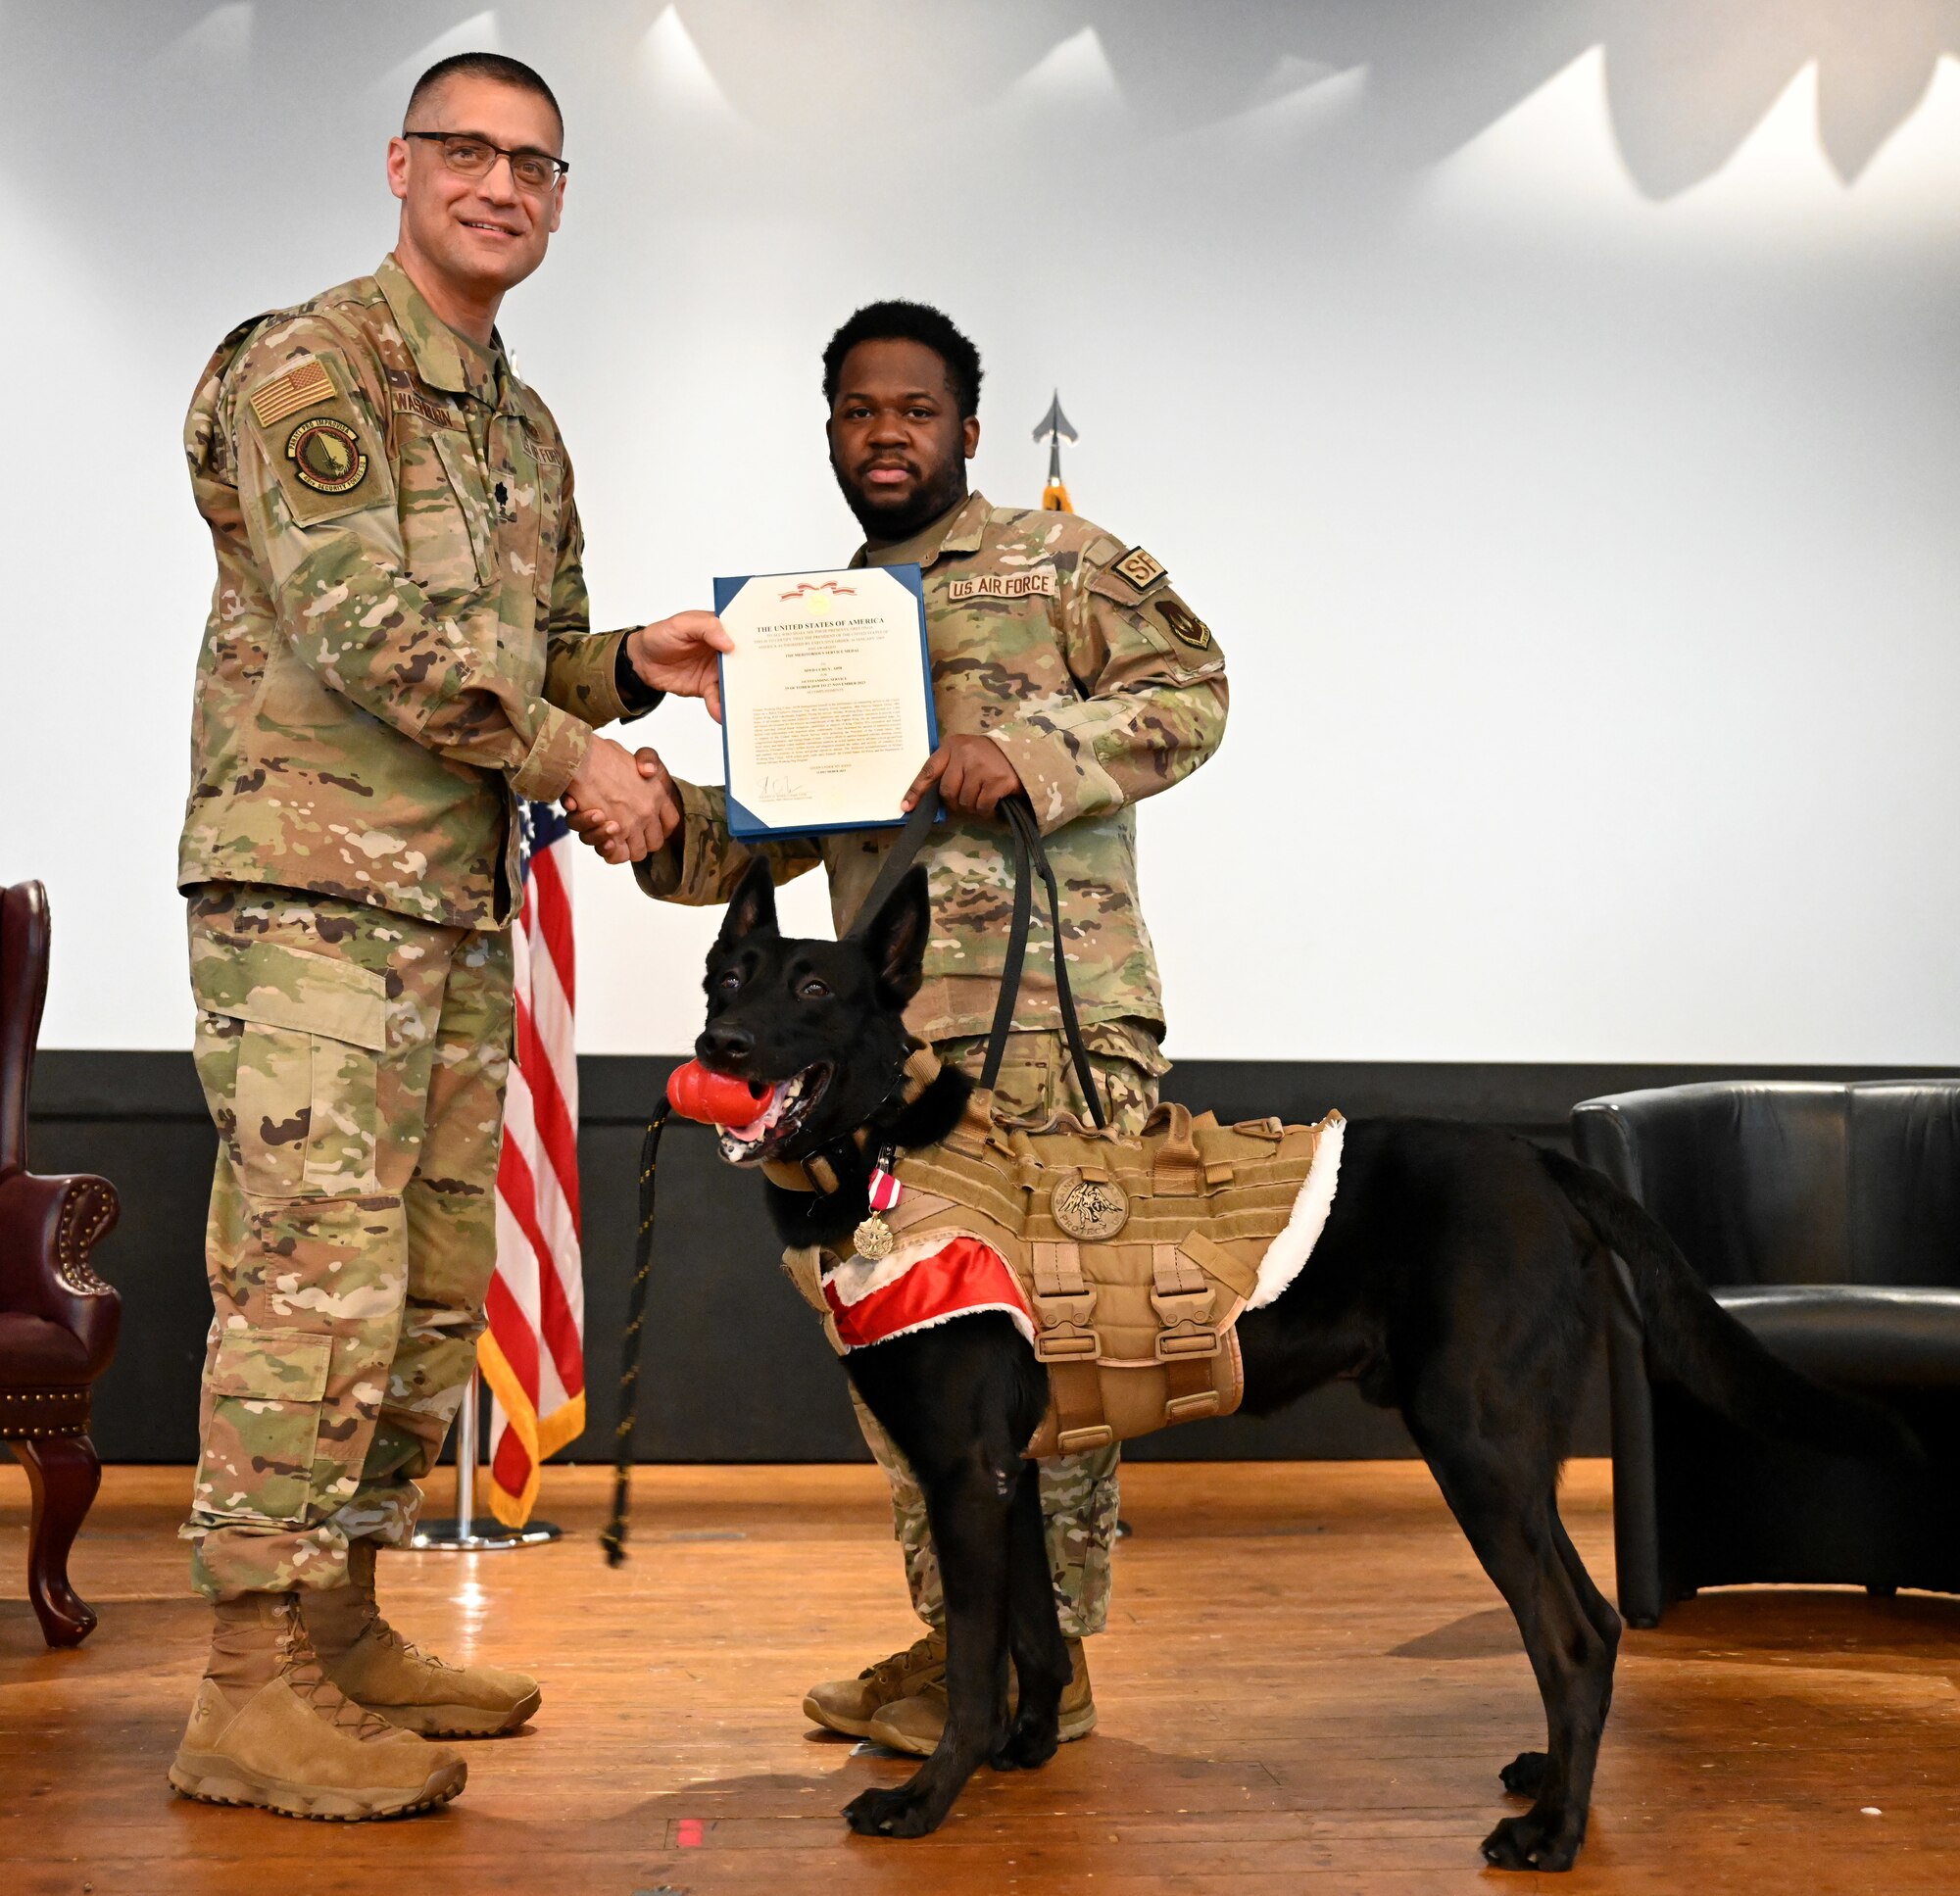 U.S. Air Force Lt. Col. Ben Washburn, left, 48th Security Forces Squadron commander, presents the Meritorious Service Medal and certificate to Military Working Dog Cchuy, at a double-retirement ceremony with MWD Ukkie, at Royal Air Force Lakenheath, England, Dec. 13, 2023. Cchuy is being adopted by his final handler, Staff Sgt. Ben Kaupp (not pictured) and his family, but stood on the stage with another handler, due to the tradition of officially handing over the retired MWD to his or her new family. (U.S, Air Force photo by Karen Abeyasekere)